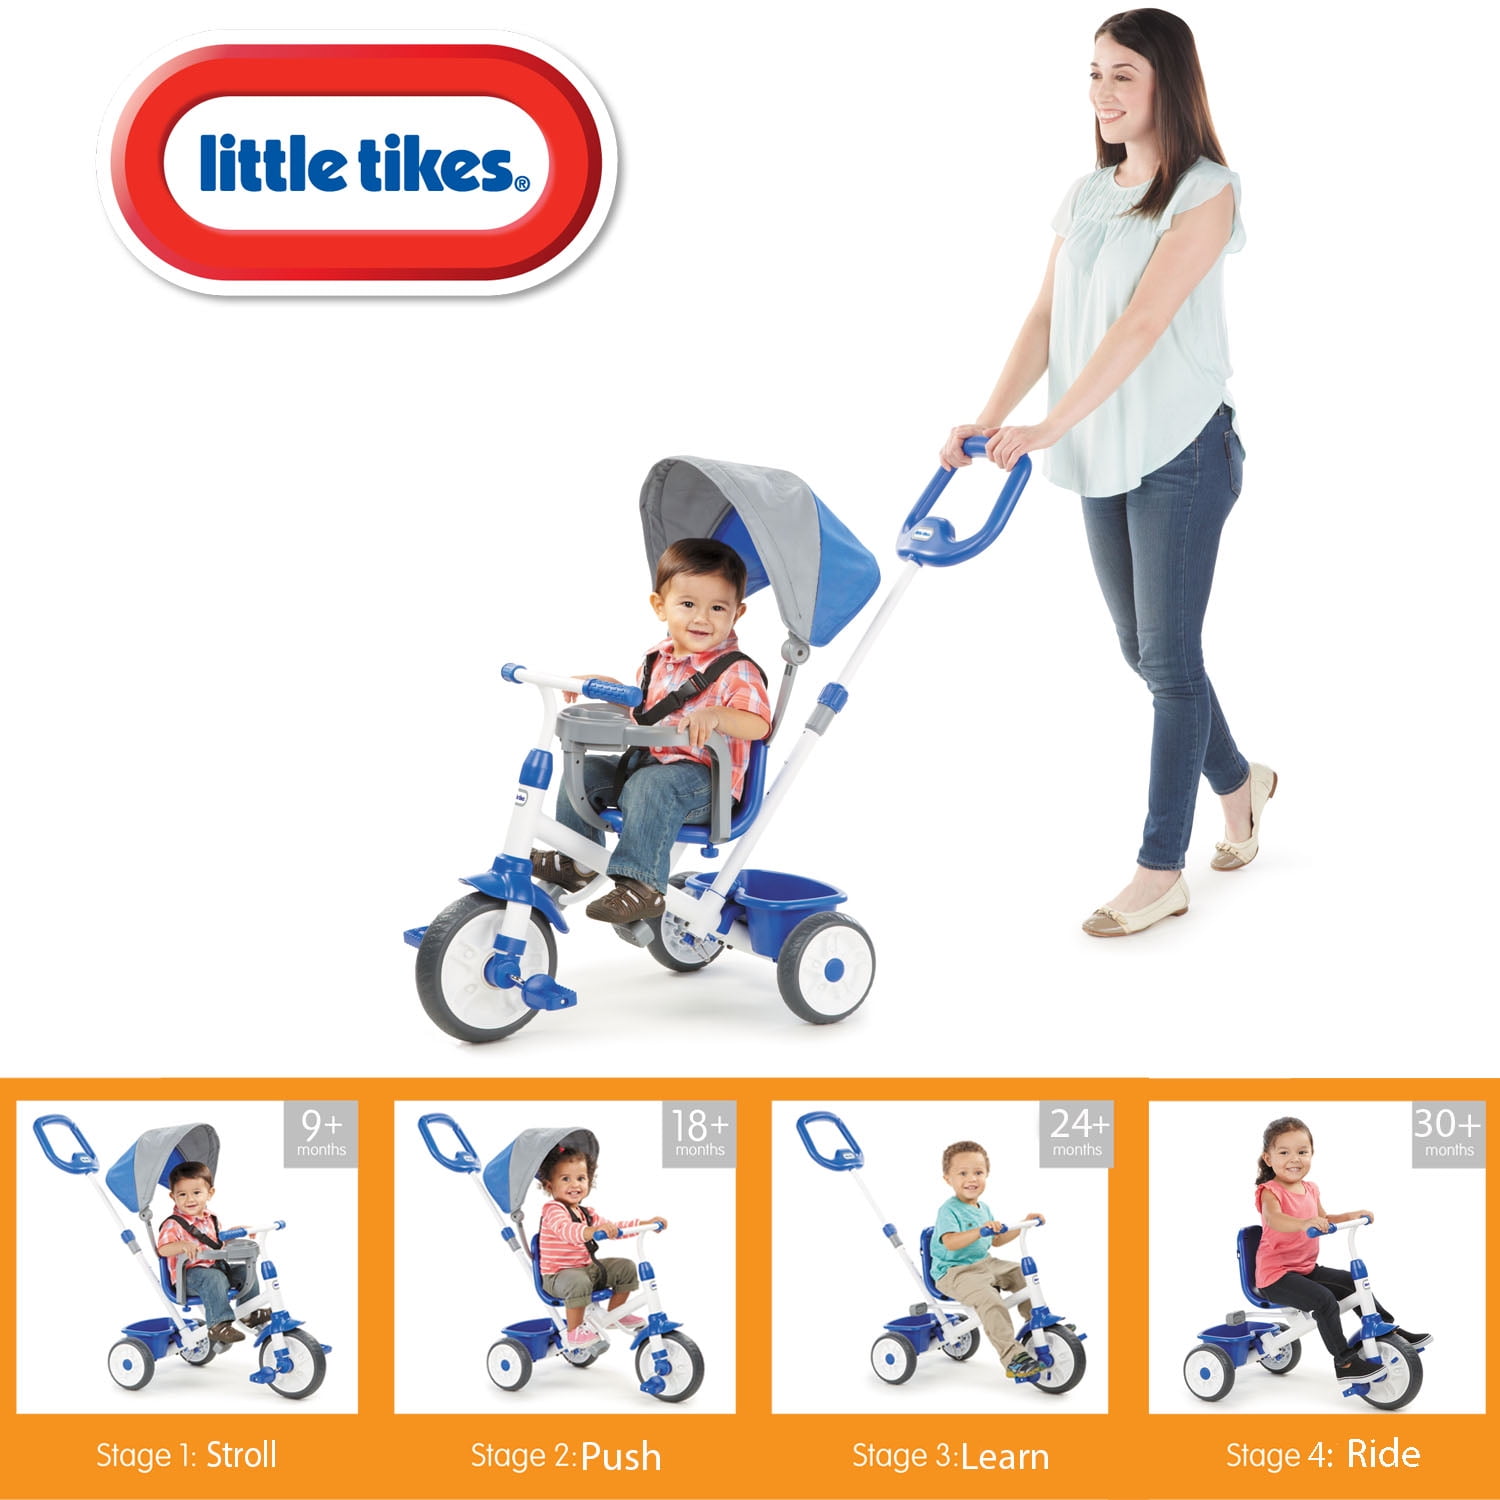 4 in 1 tricycle walmart